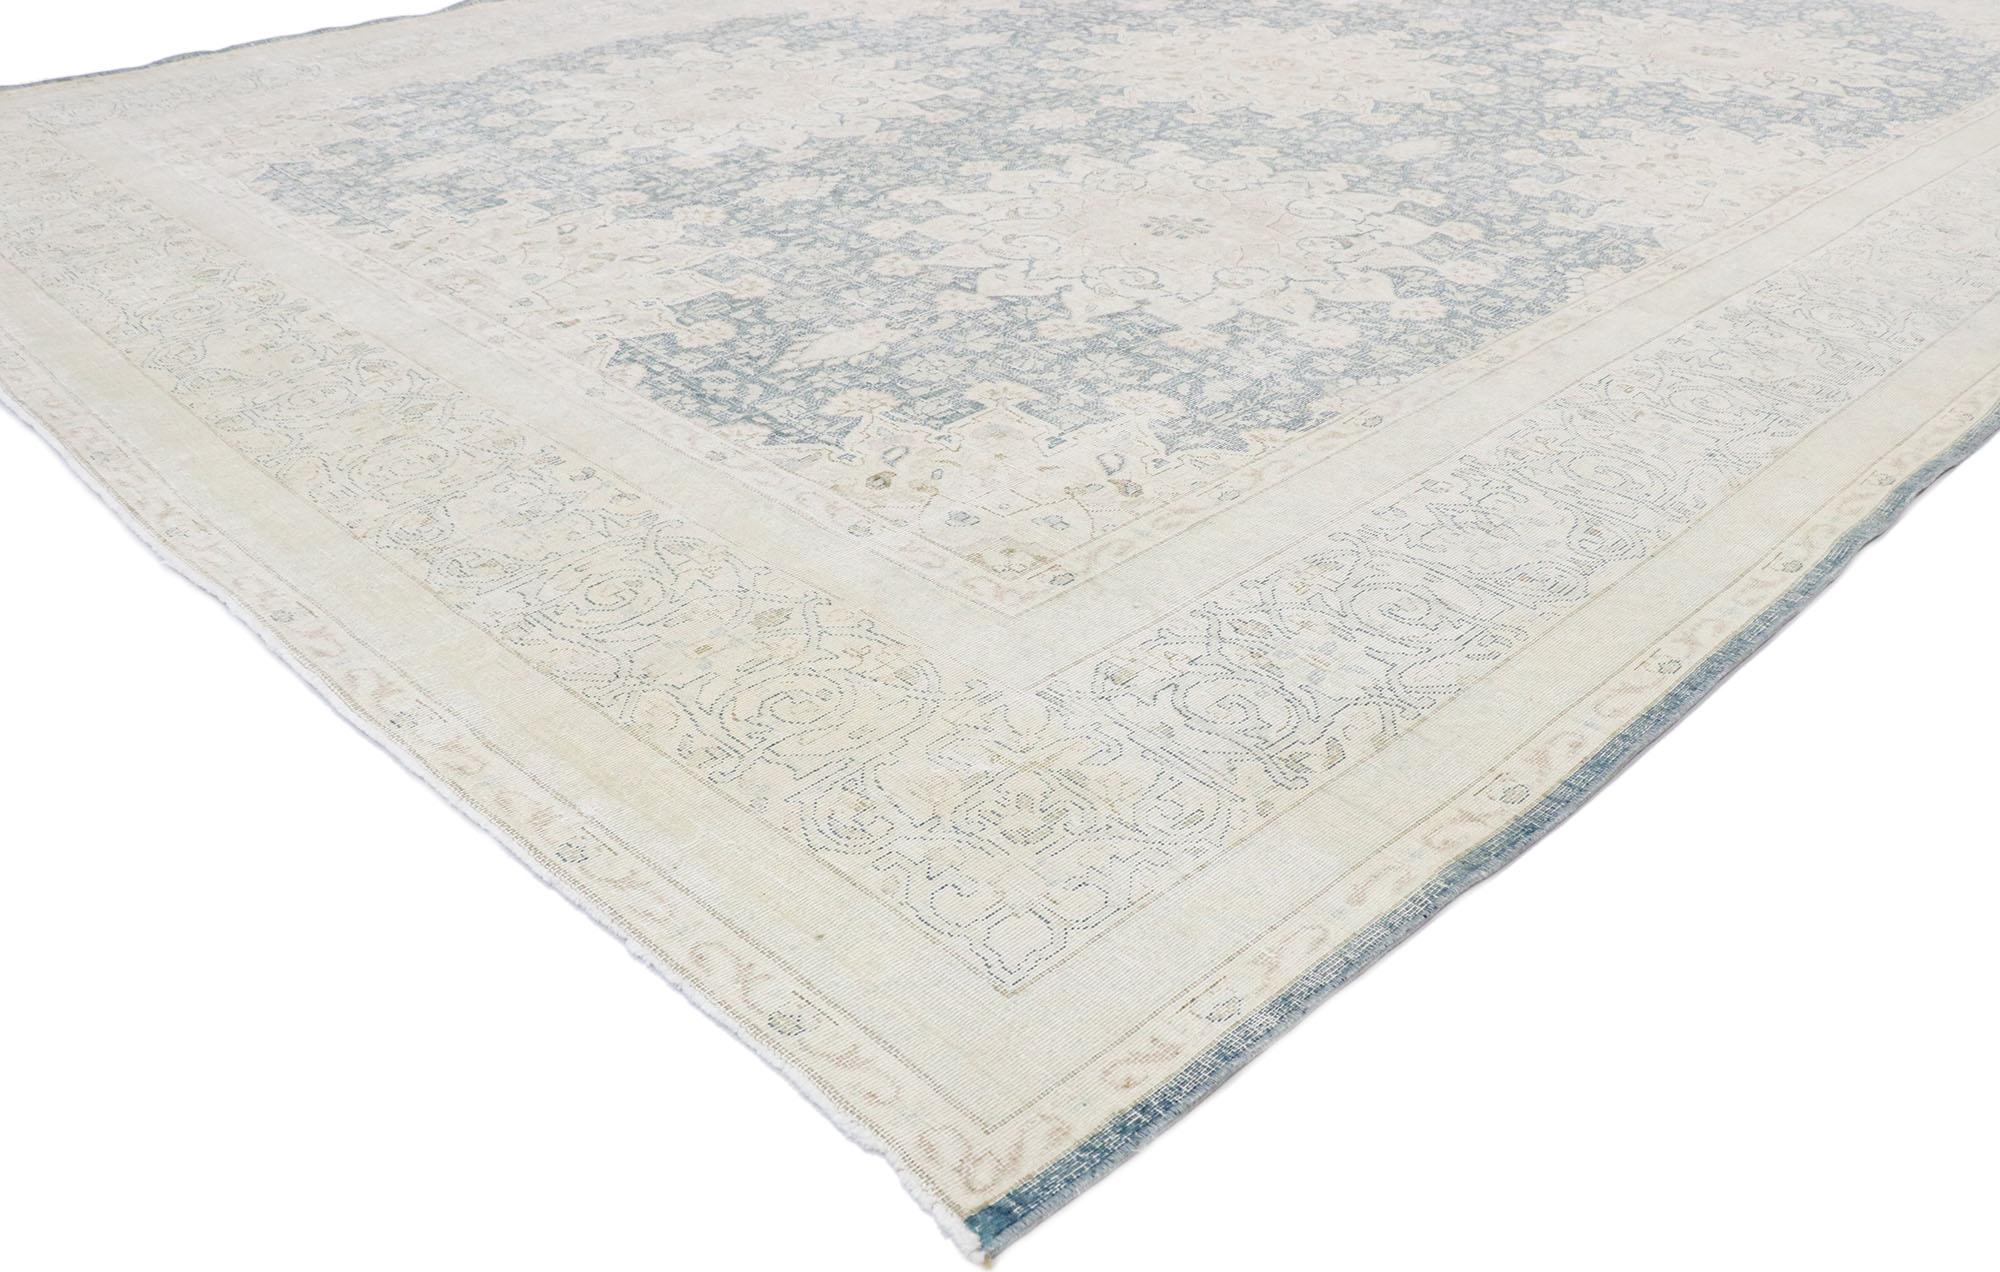 53393, distressed vintage Persian Kerman Rug with English Country Cottage style. Light and airy with rustic sensibility, this hand knotted wool vintage Persian Kerman rug is poised to impress. The antique washed field features five round starburst